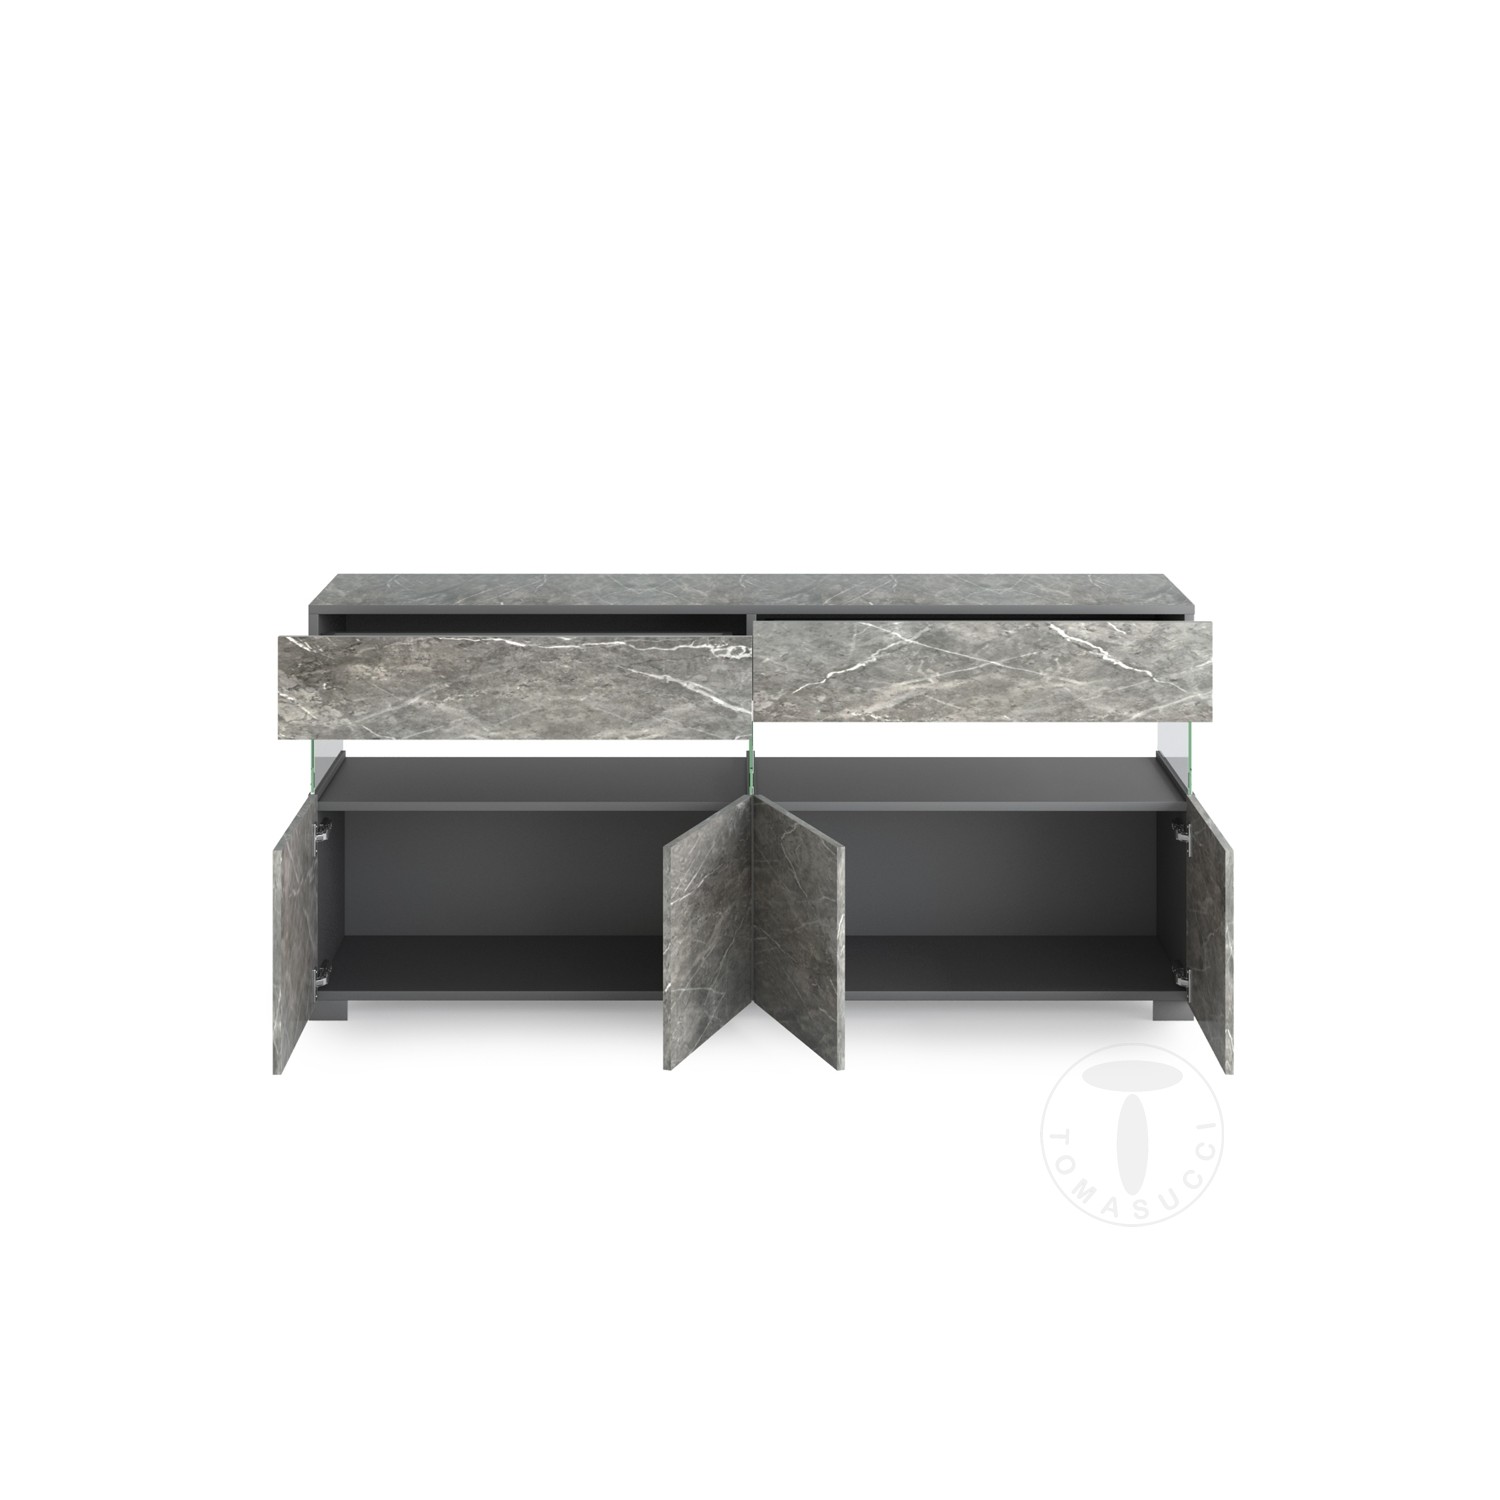 Tomasucci madia FLOAT MARBLE 4A